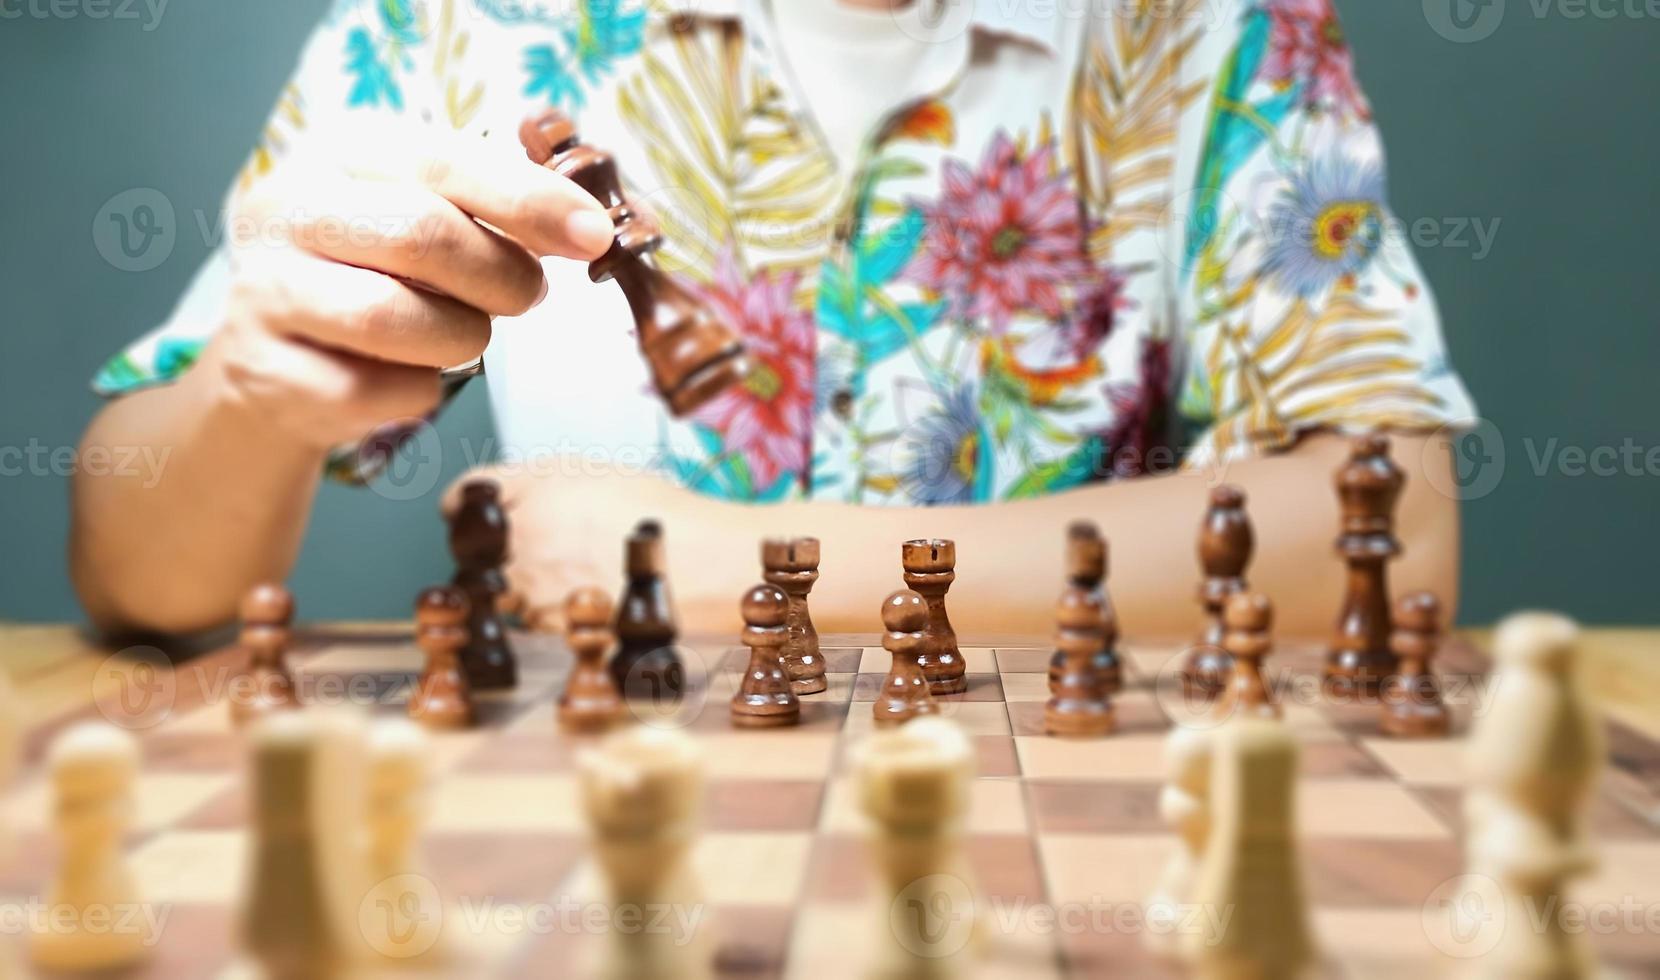 Man play game of chess shows a strong will to plan and fight on the field to defeat your opponents. Pictures show different time periods. from start to finish and predict the descent of the winner. photo